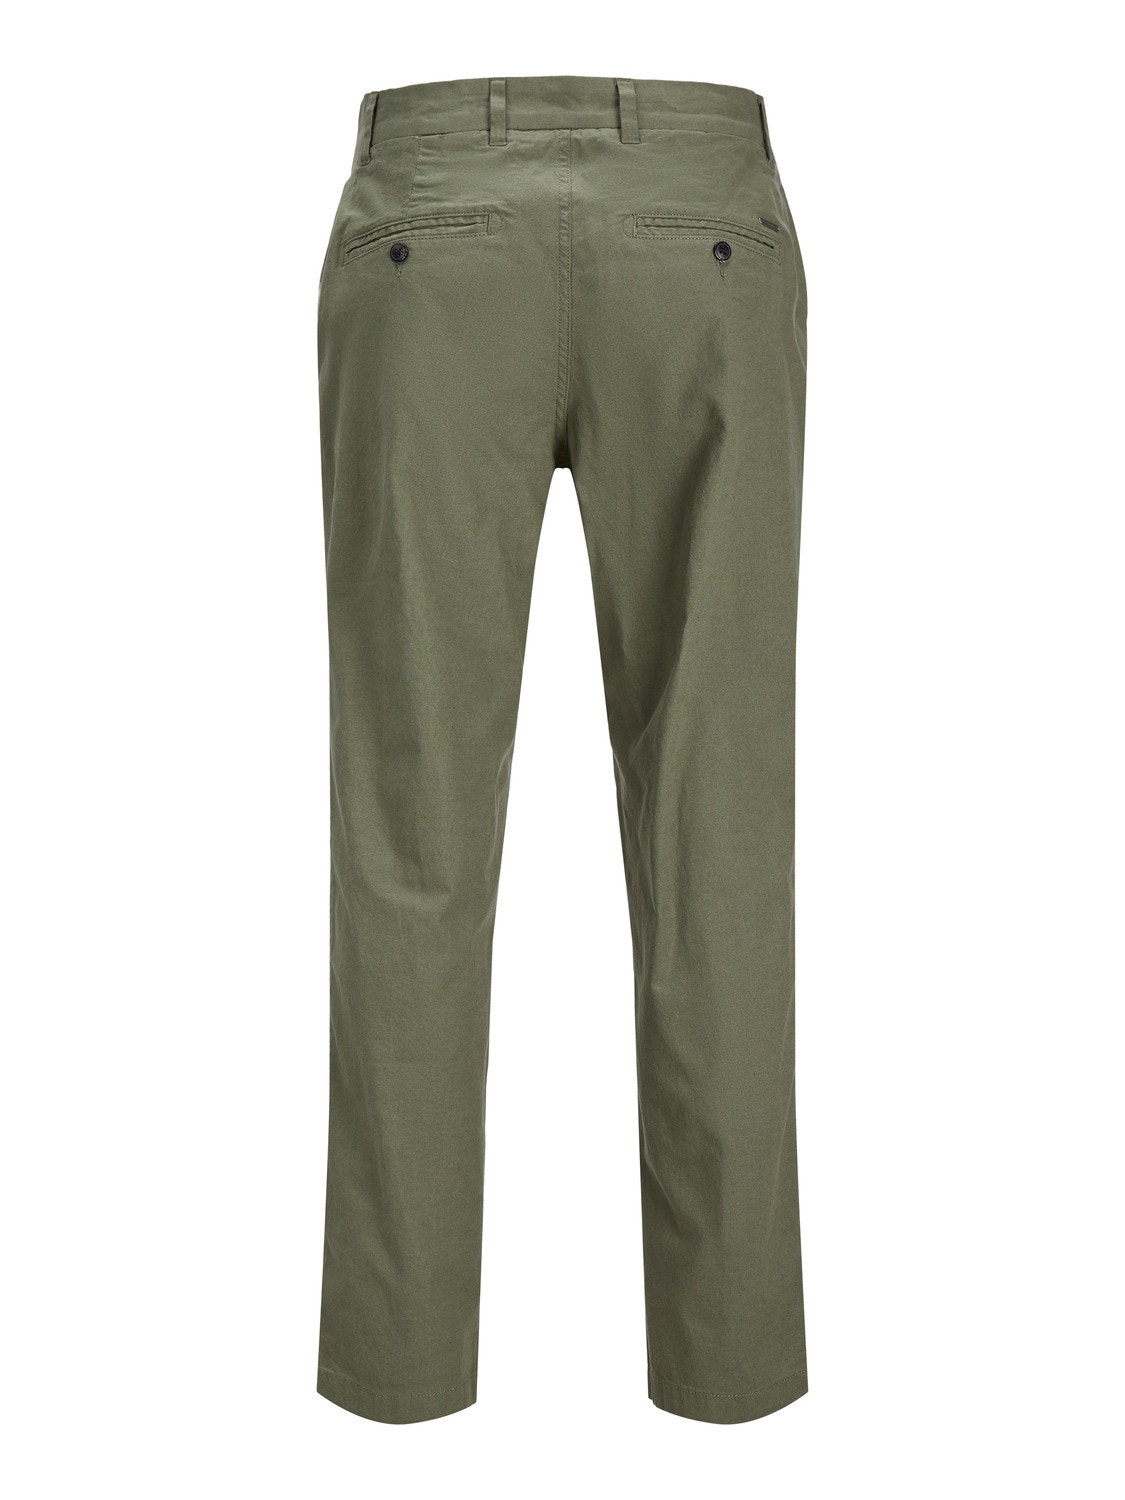 Jack & Jones Plus Size Tapered Fit Carrot fit trousers -Dusty Olive - 12259702